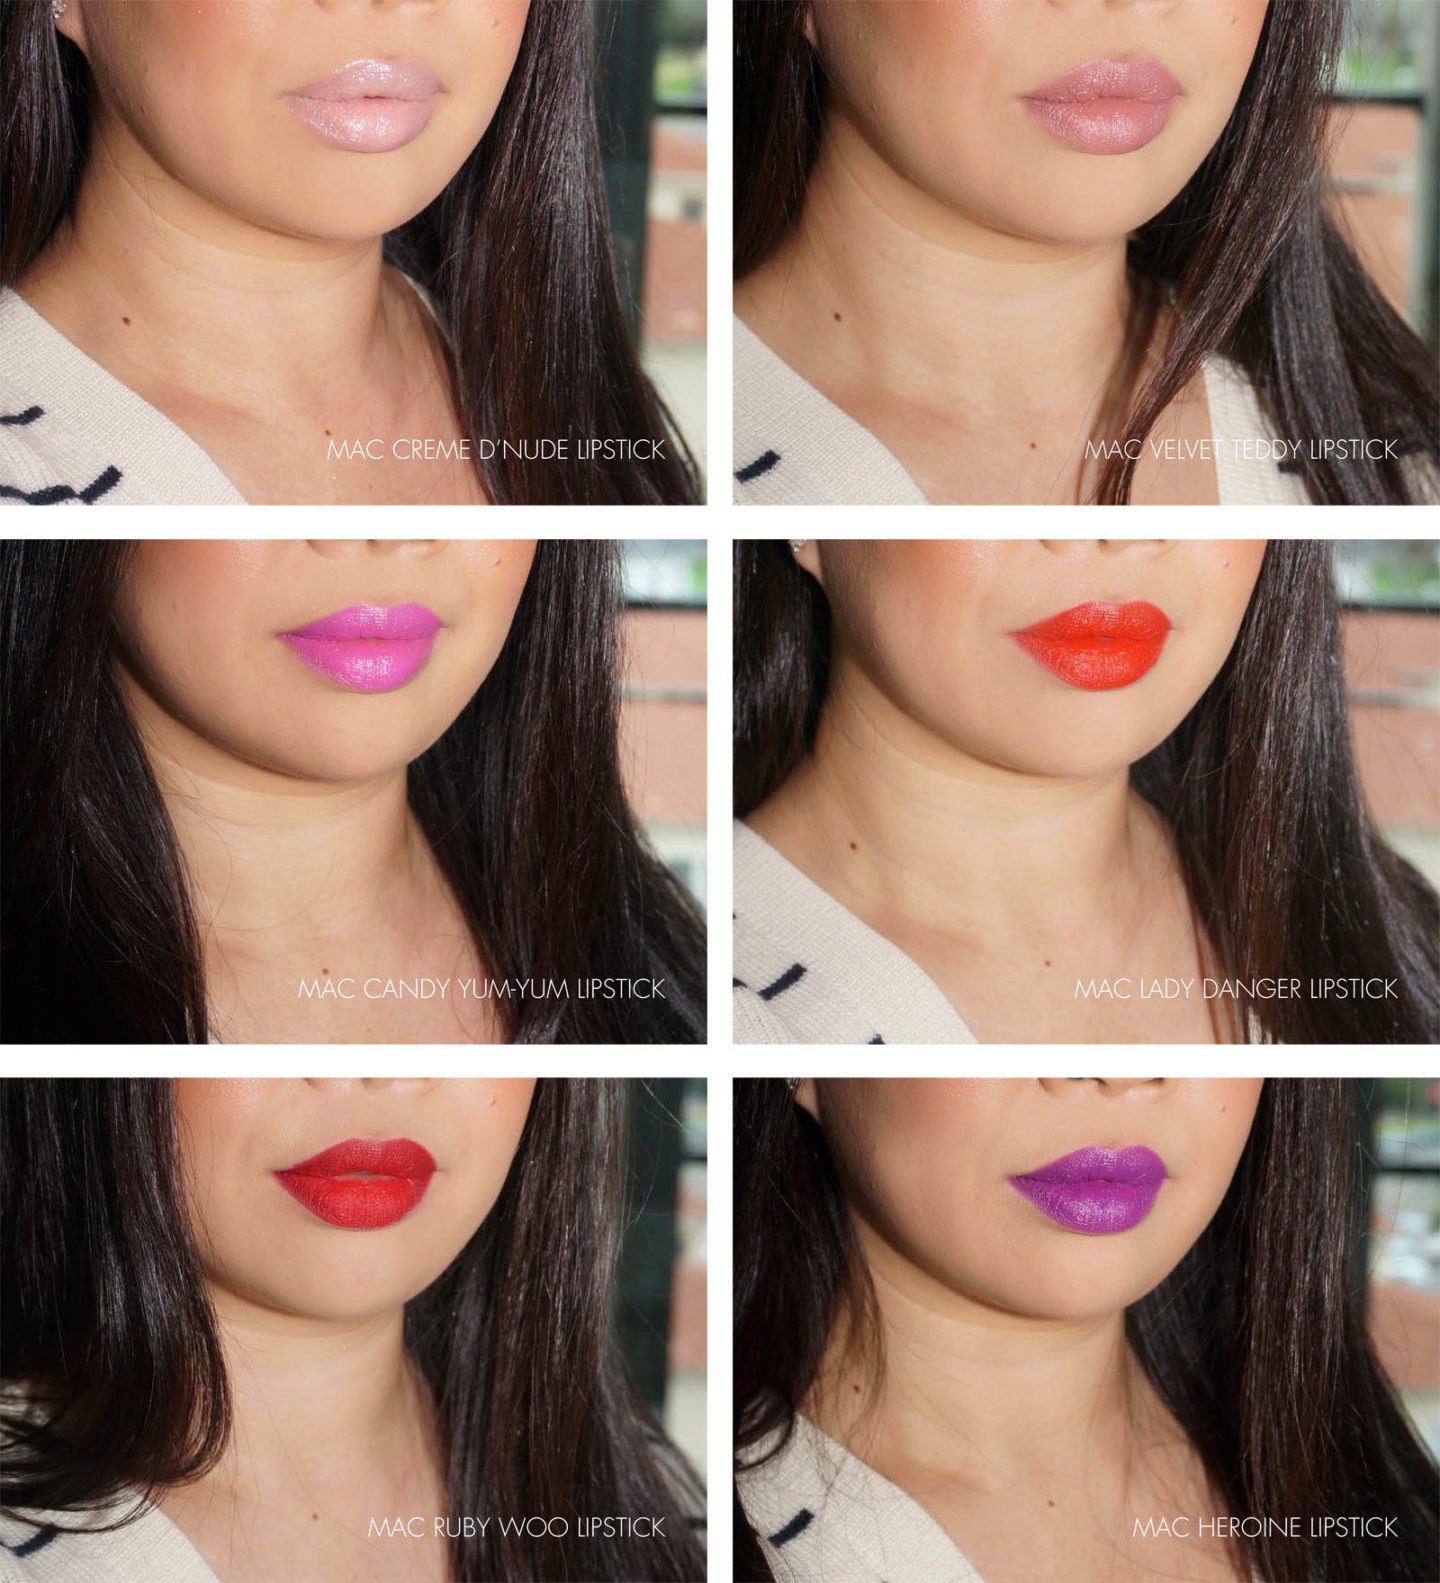 MAC Shadescents Lipstick Heroine, Ruby Woo, Lady Danger, Candy Yum-Yum, Velvet Teddy and Creme d Nude swatches